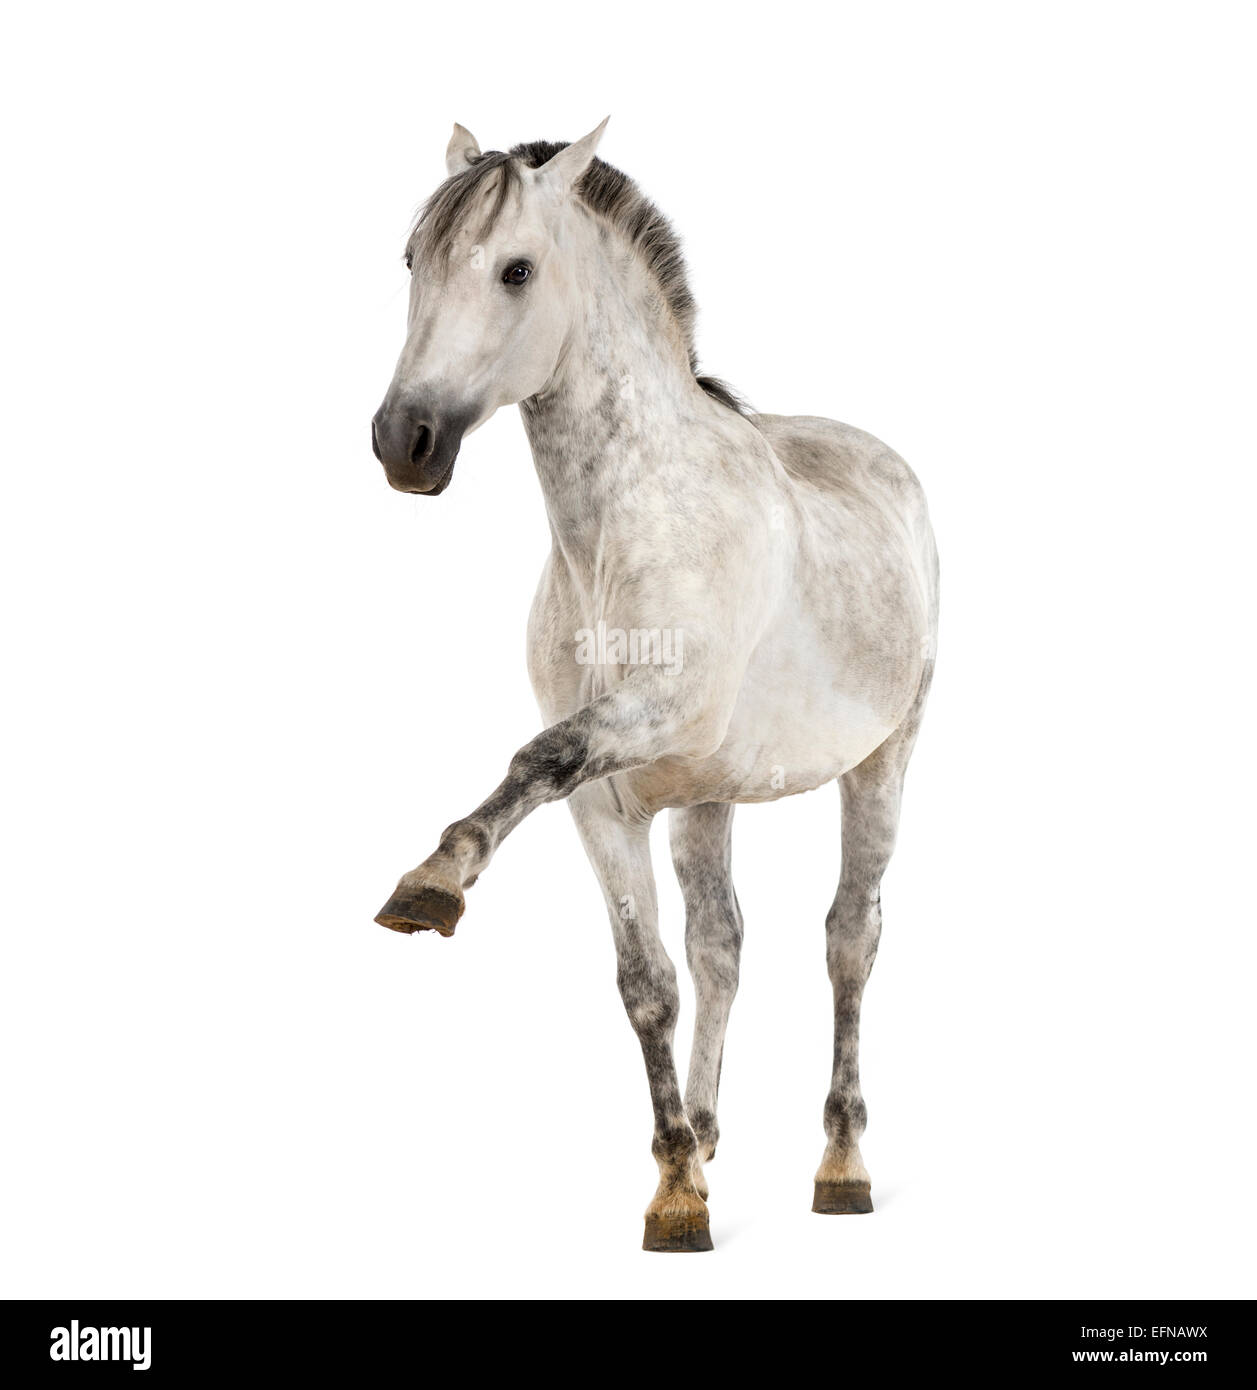 Andalusian horse with a leg up against white background Stock Photo